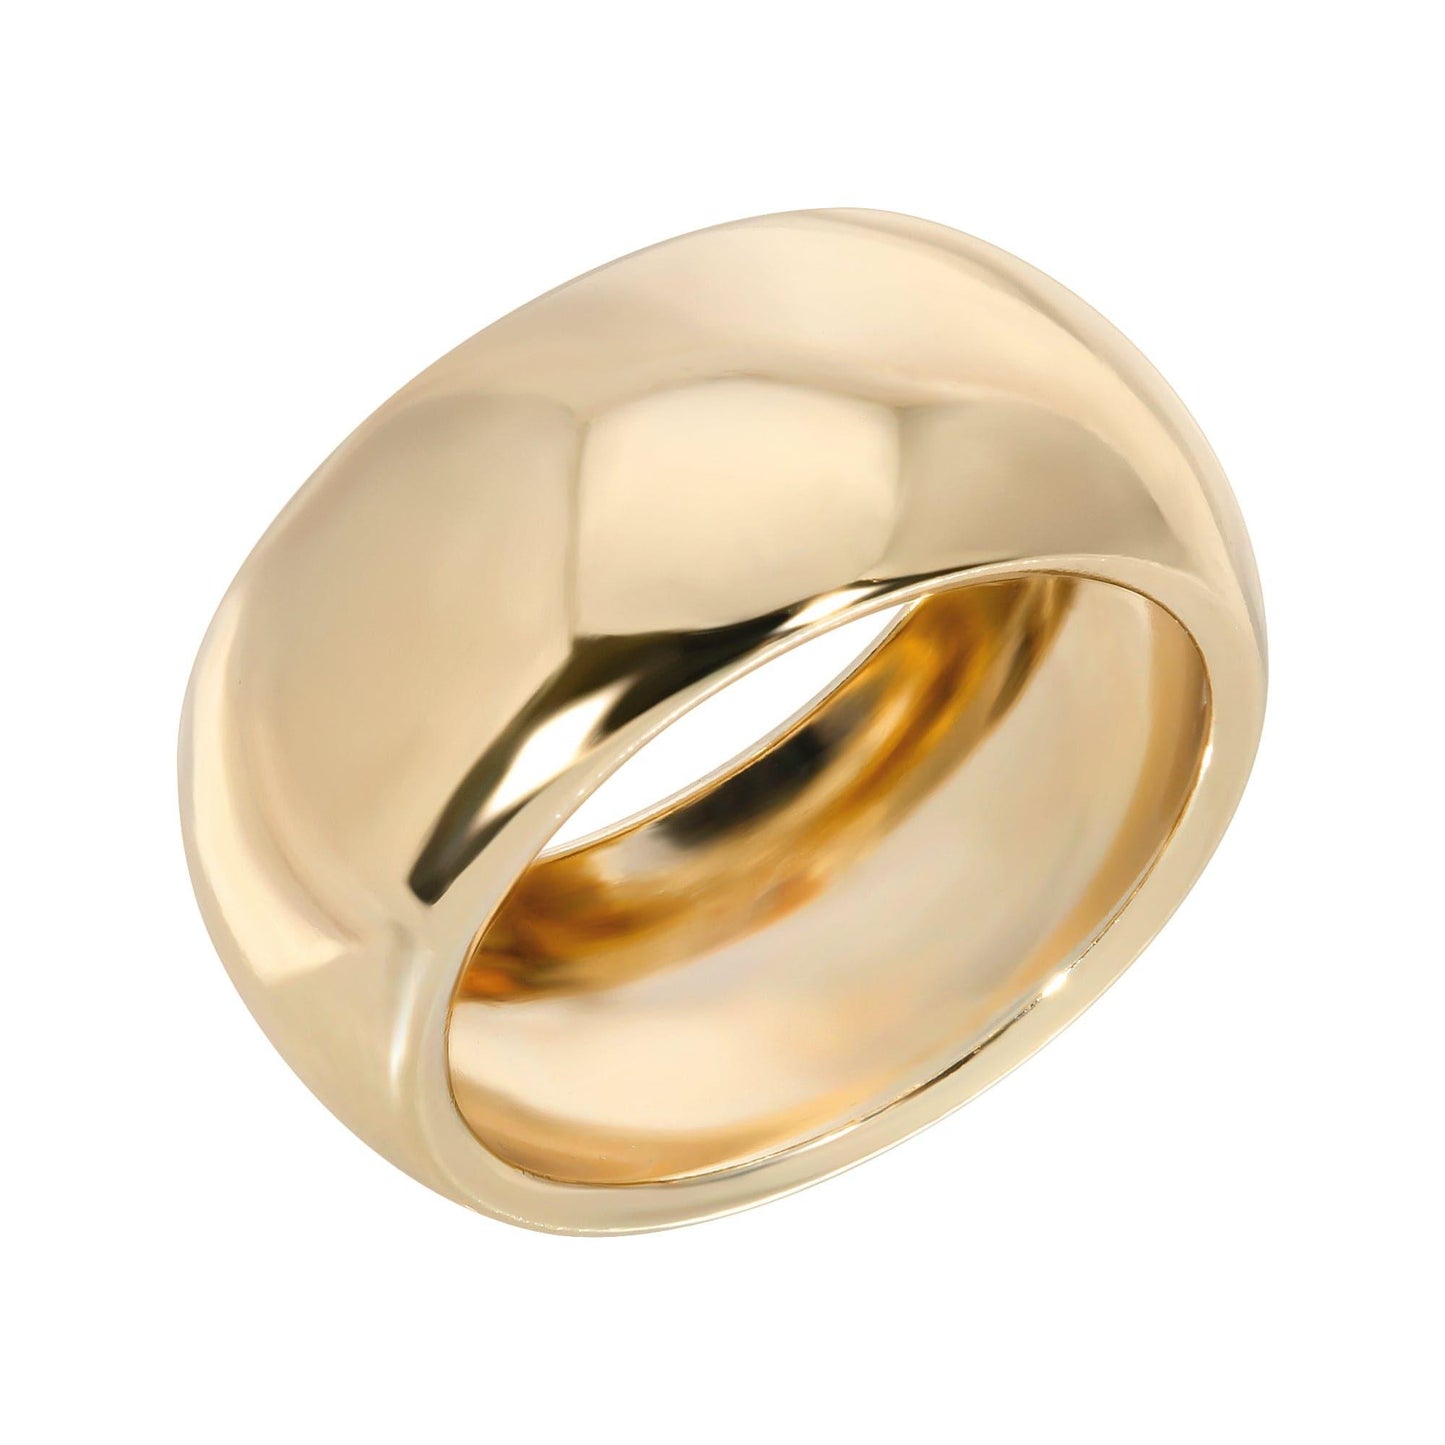 9.5MM Domed Ring - TheGivenGet